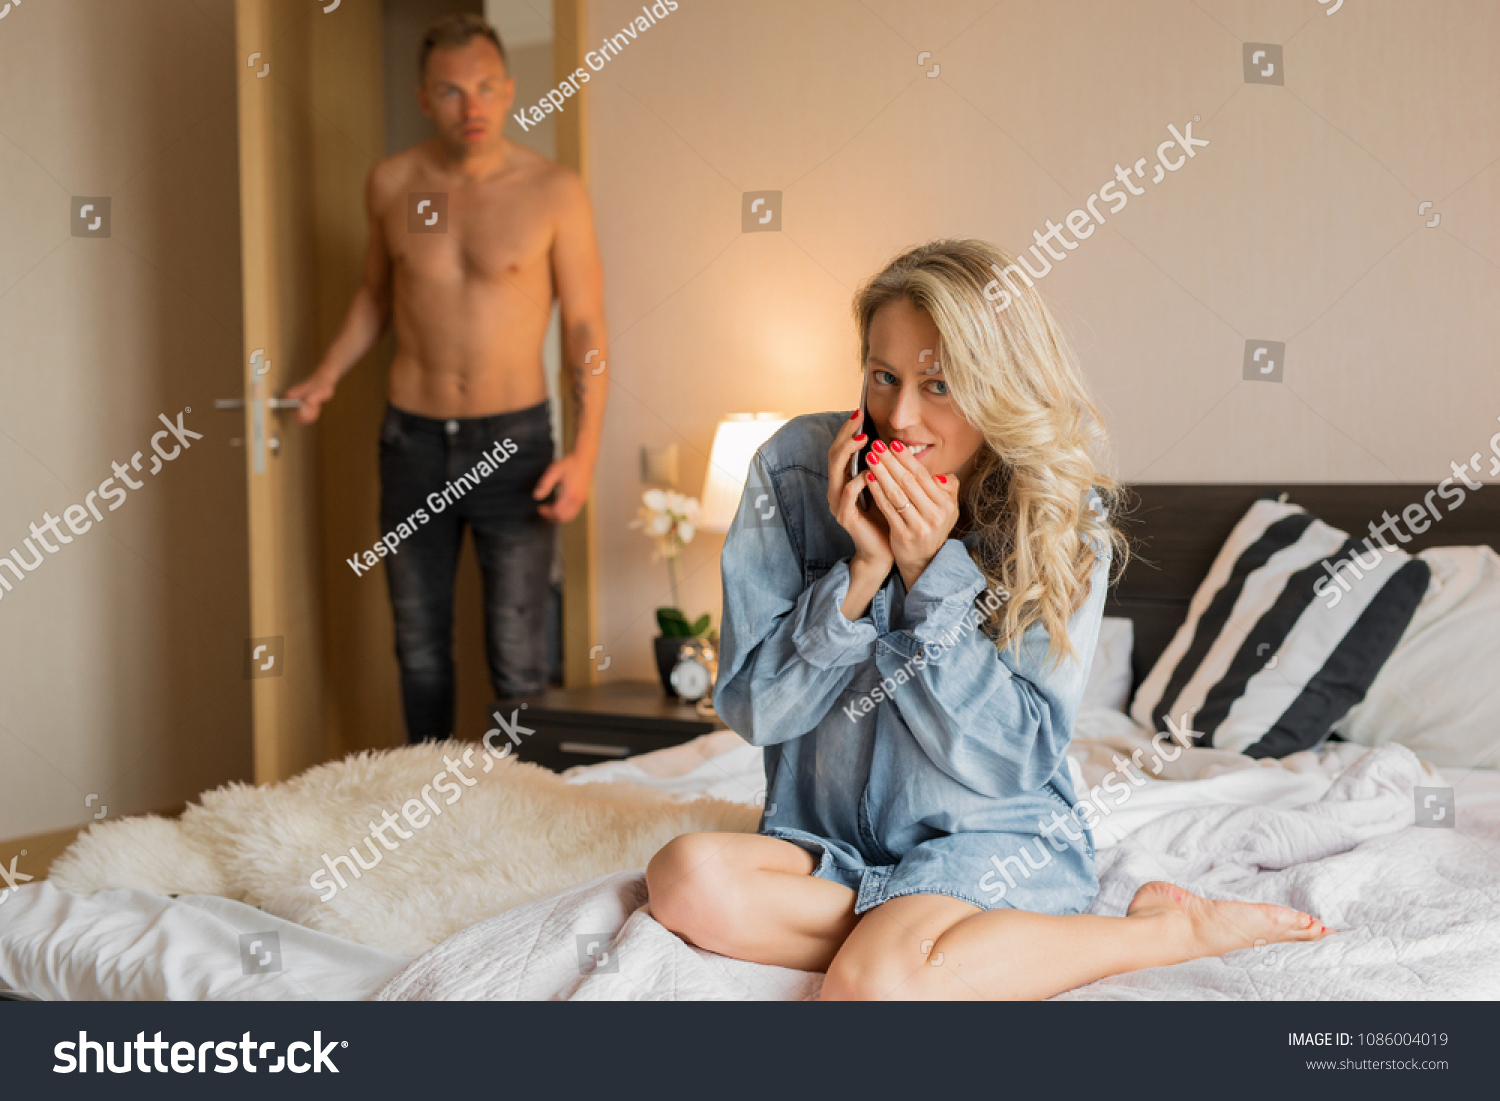 Wife gets caught cheating on husband